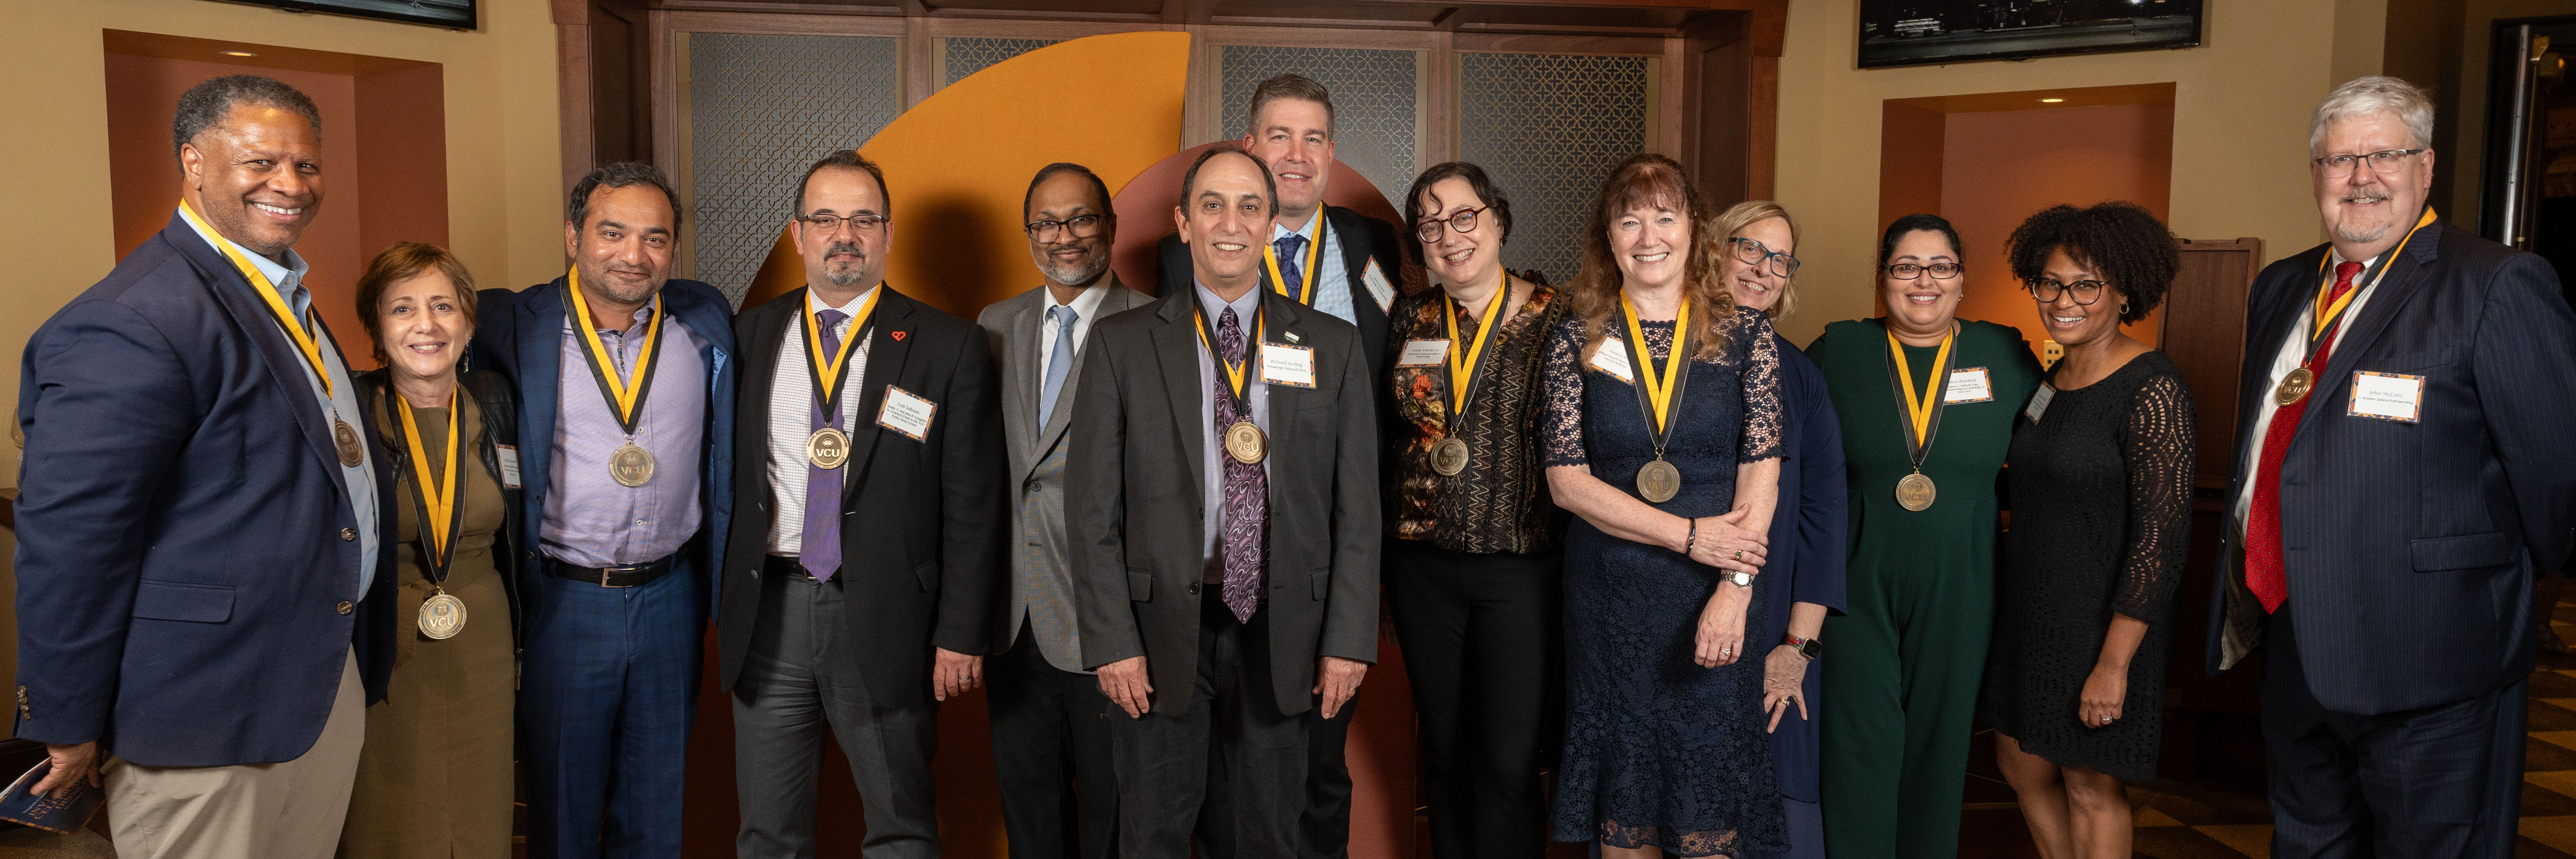 Department of Internal Medicine faculty commemorate recent appointments at VCU Investiture Celebration. Photo by VCU Development and Alumni Relations.